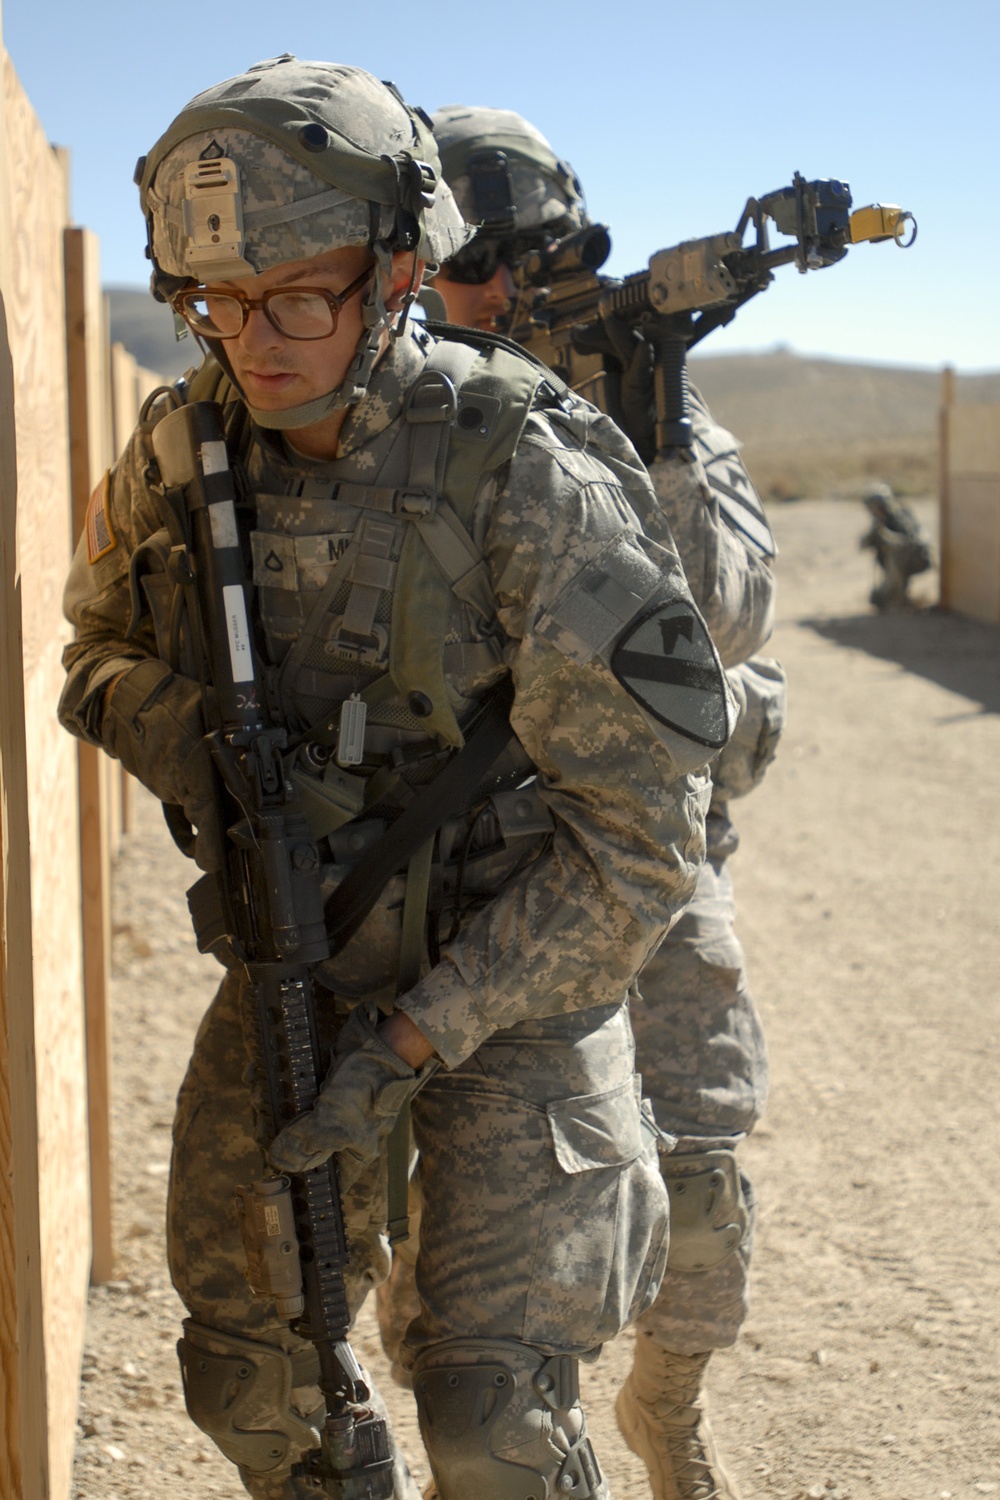 DVIDS - News - NTC prepares 1st Cav scouts for upcoming deployment